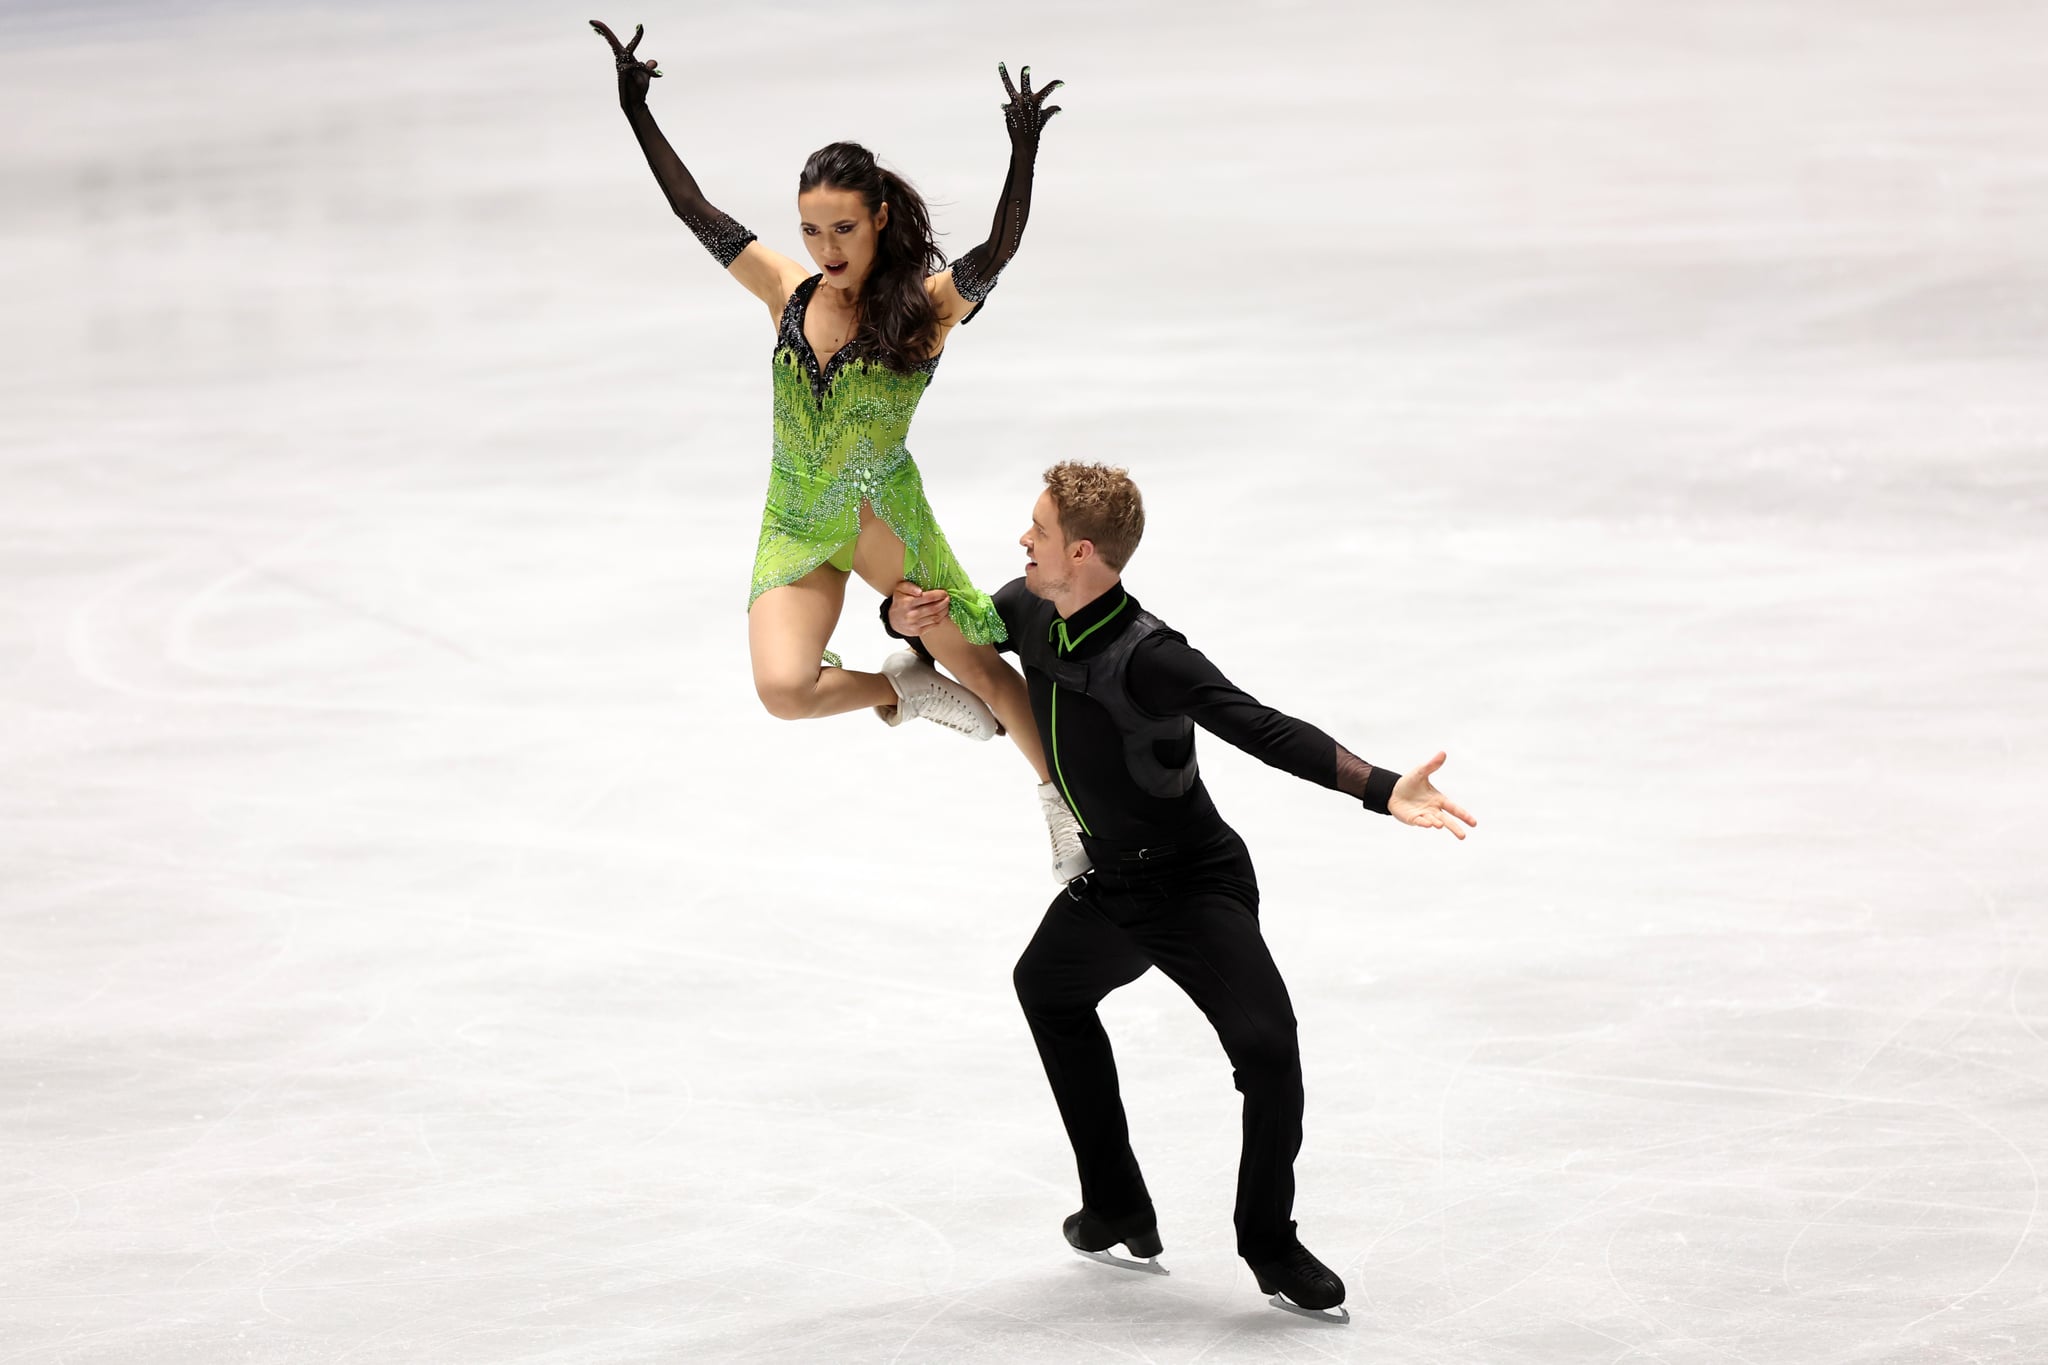 Madison Chock and Evan Bates of the United States compete in the Ice Dance Rhythm Dance during the ISU Grand Prix of Figure Skating - NHK Trophy at Yoyogi National Gymnasium on November 12, 2021.